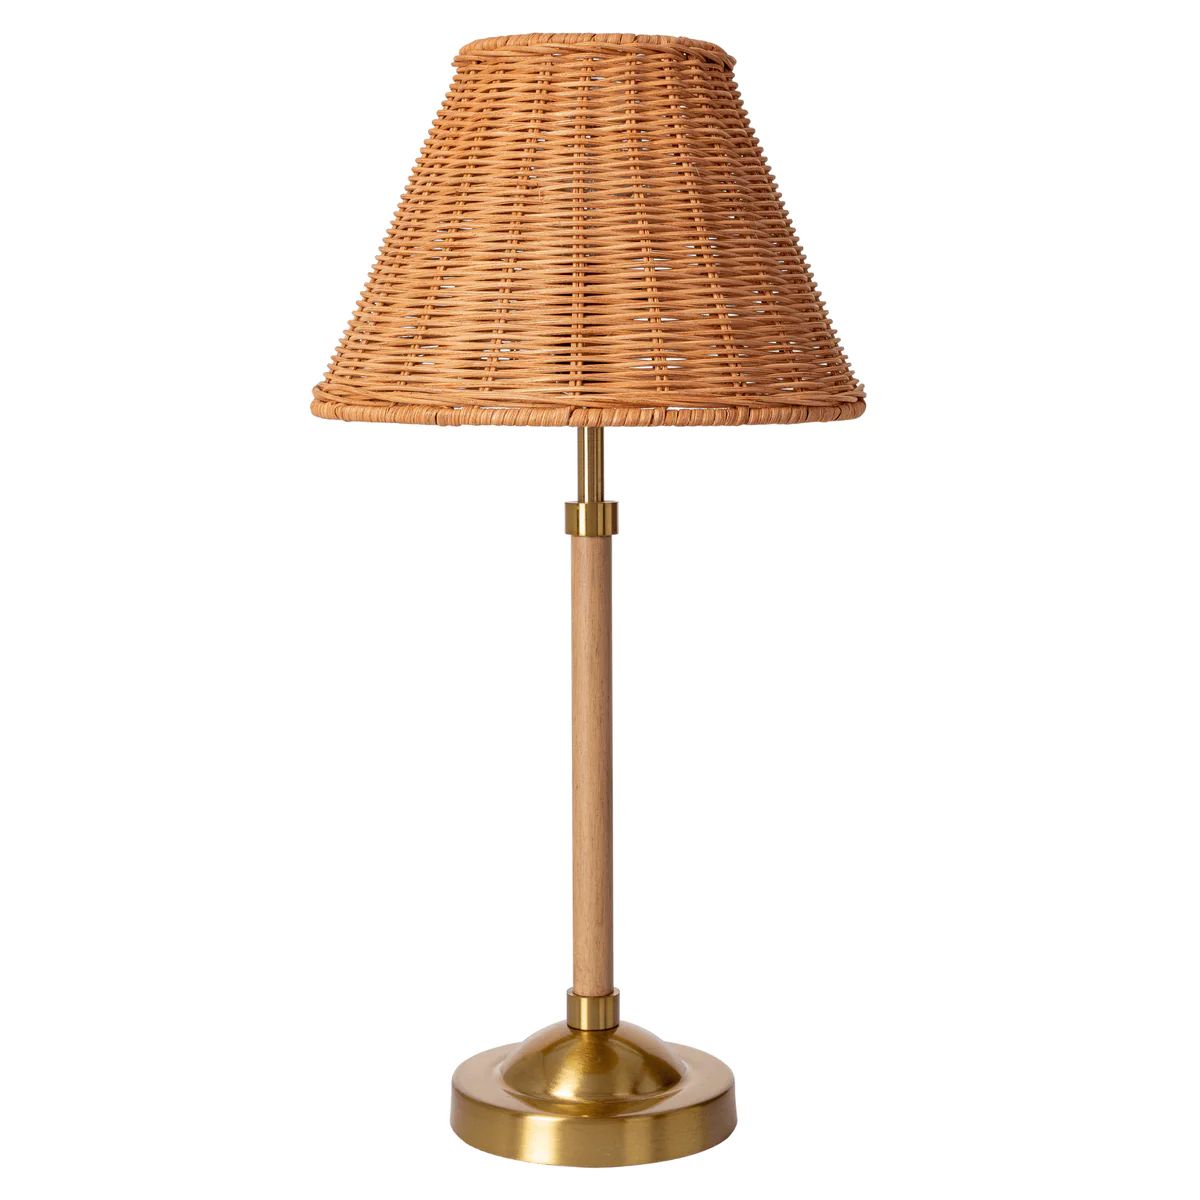 Wood Finish Table Lamp With Rattan Shade | The Well Appointed House, LLC